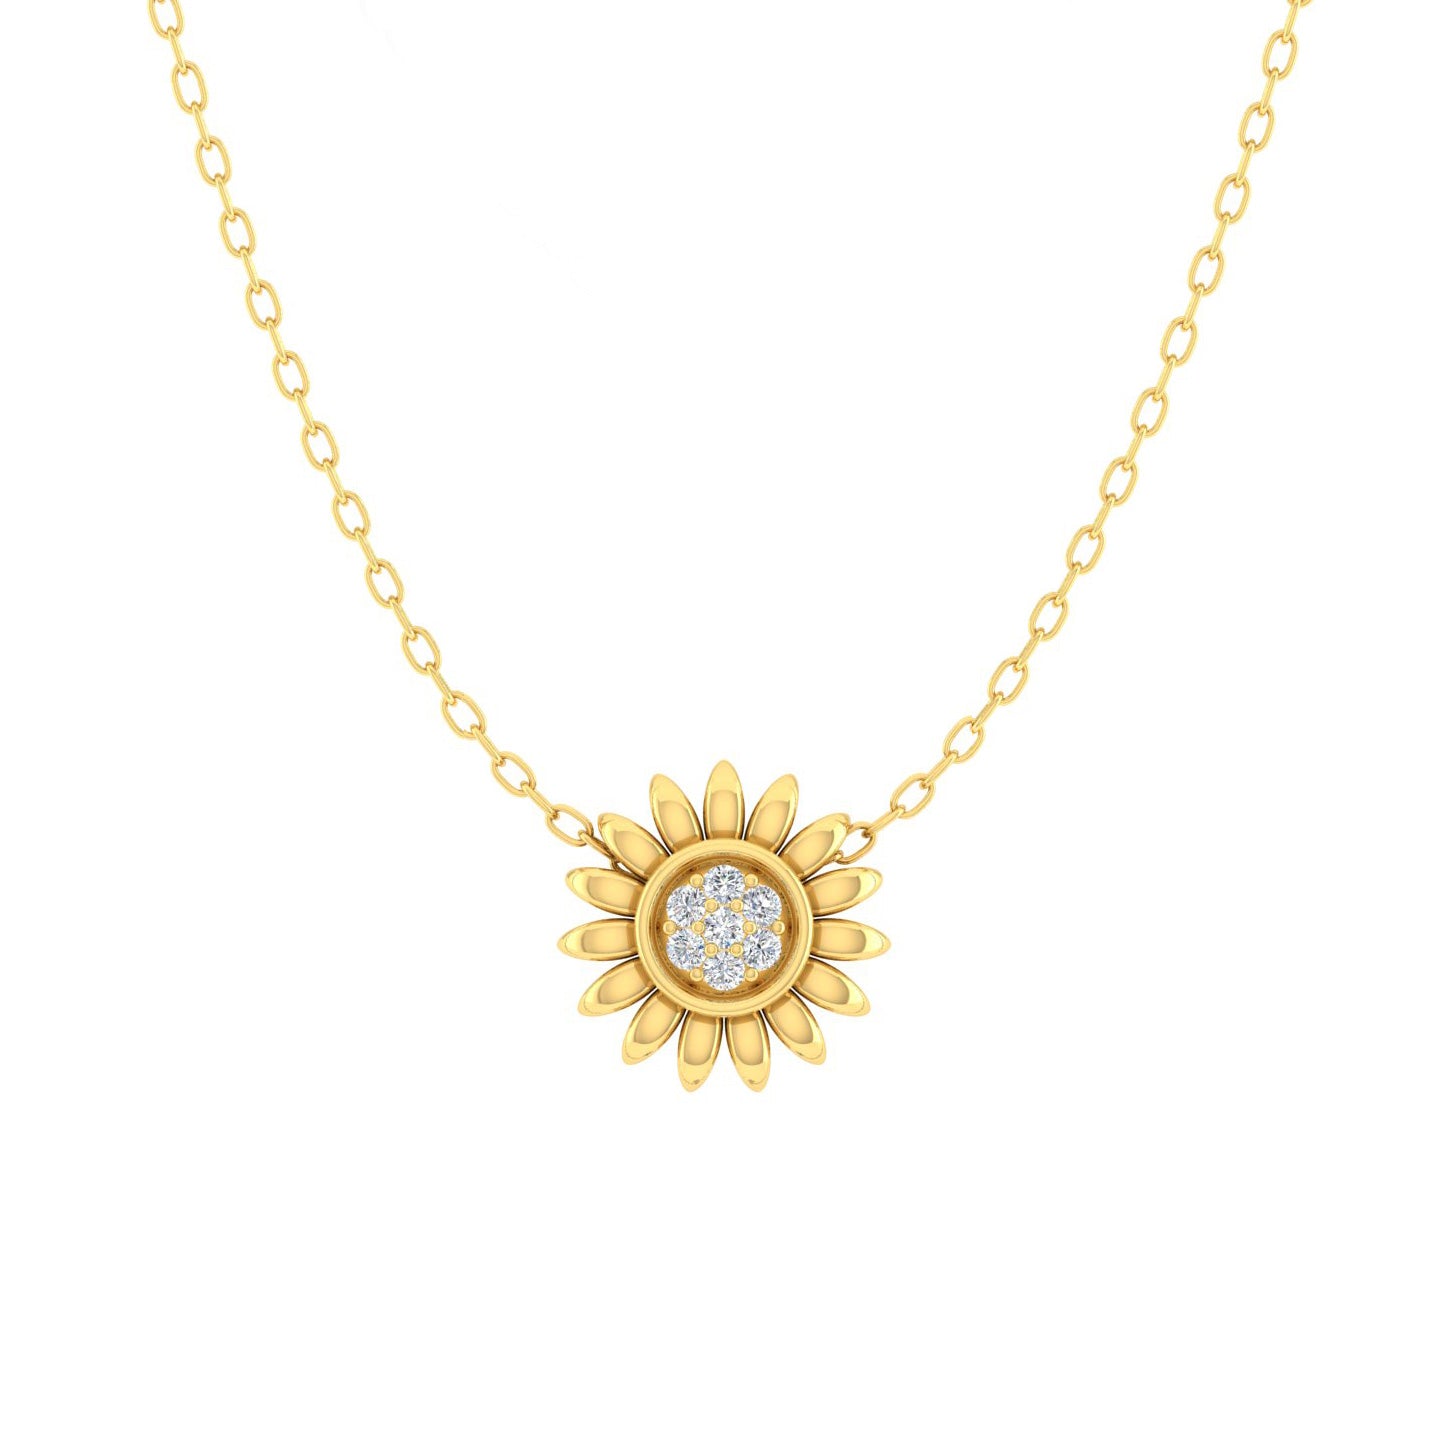 SunFlower 1/20 Cttw Natural Diamond Pendant Necklace set in 925 Sterling Silver (Yellow Gold) fine jewelry gift